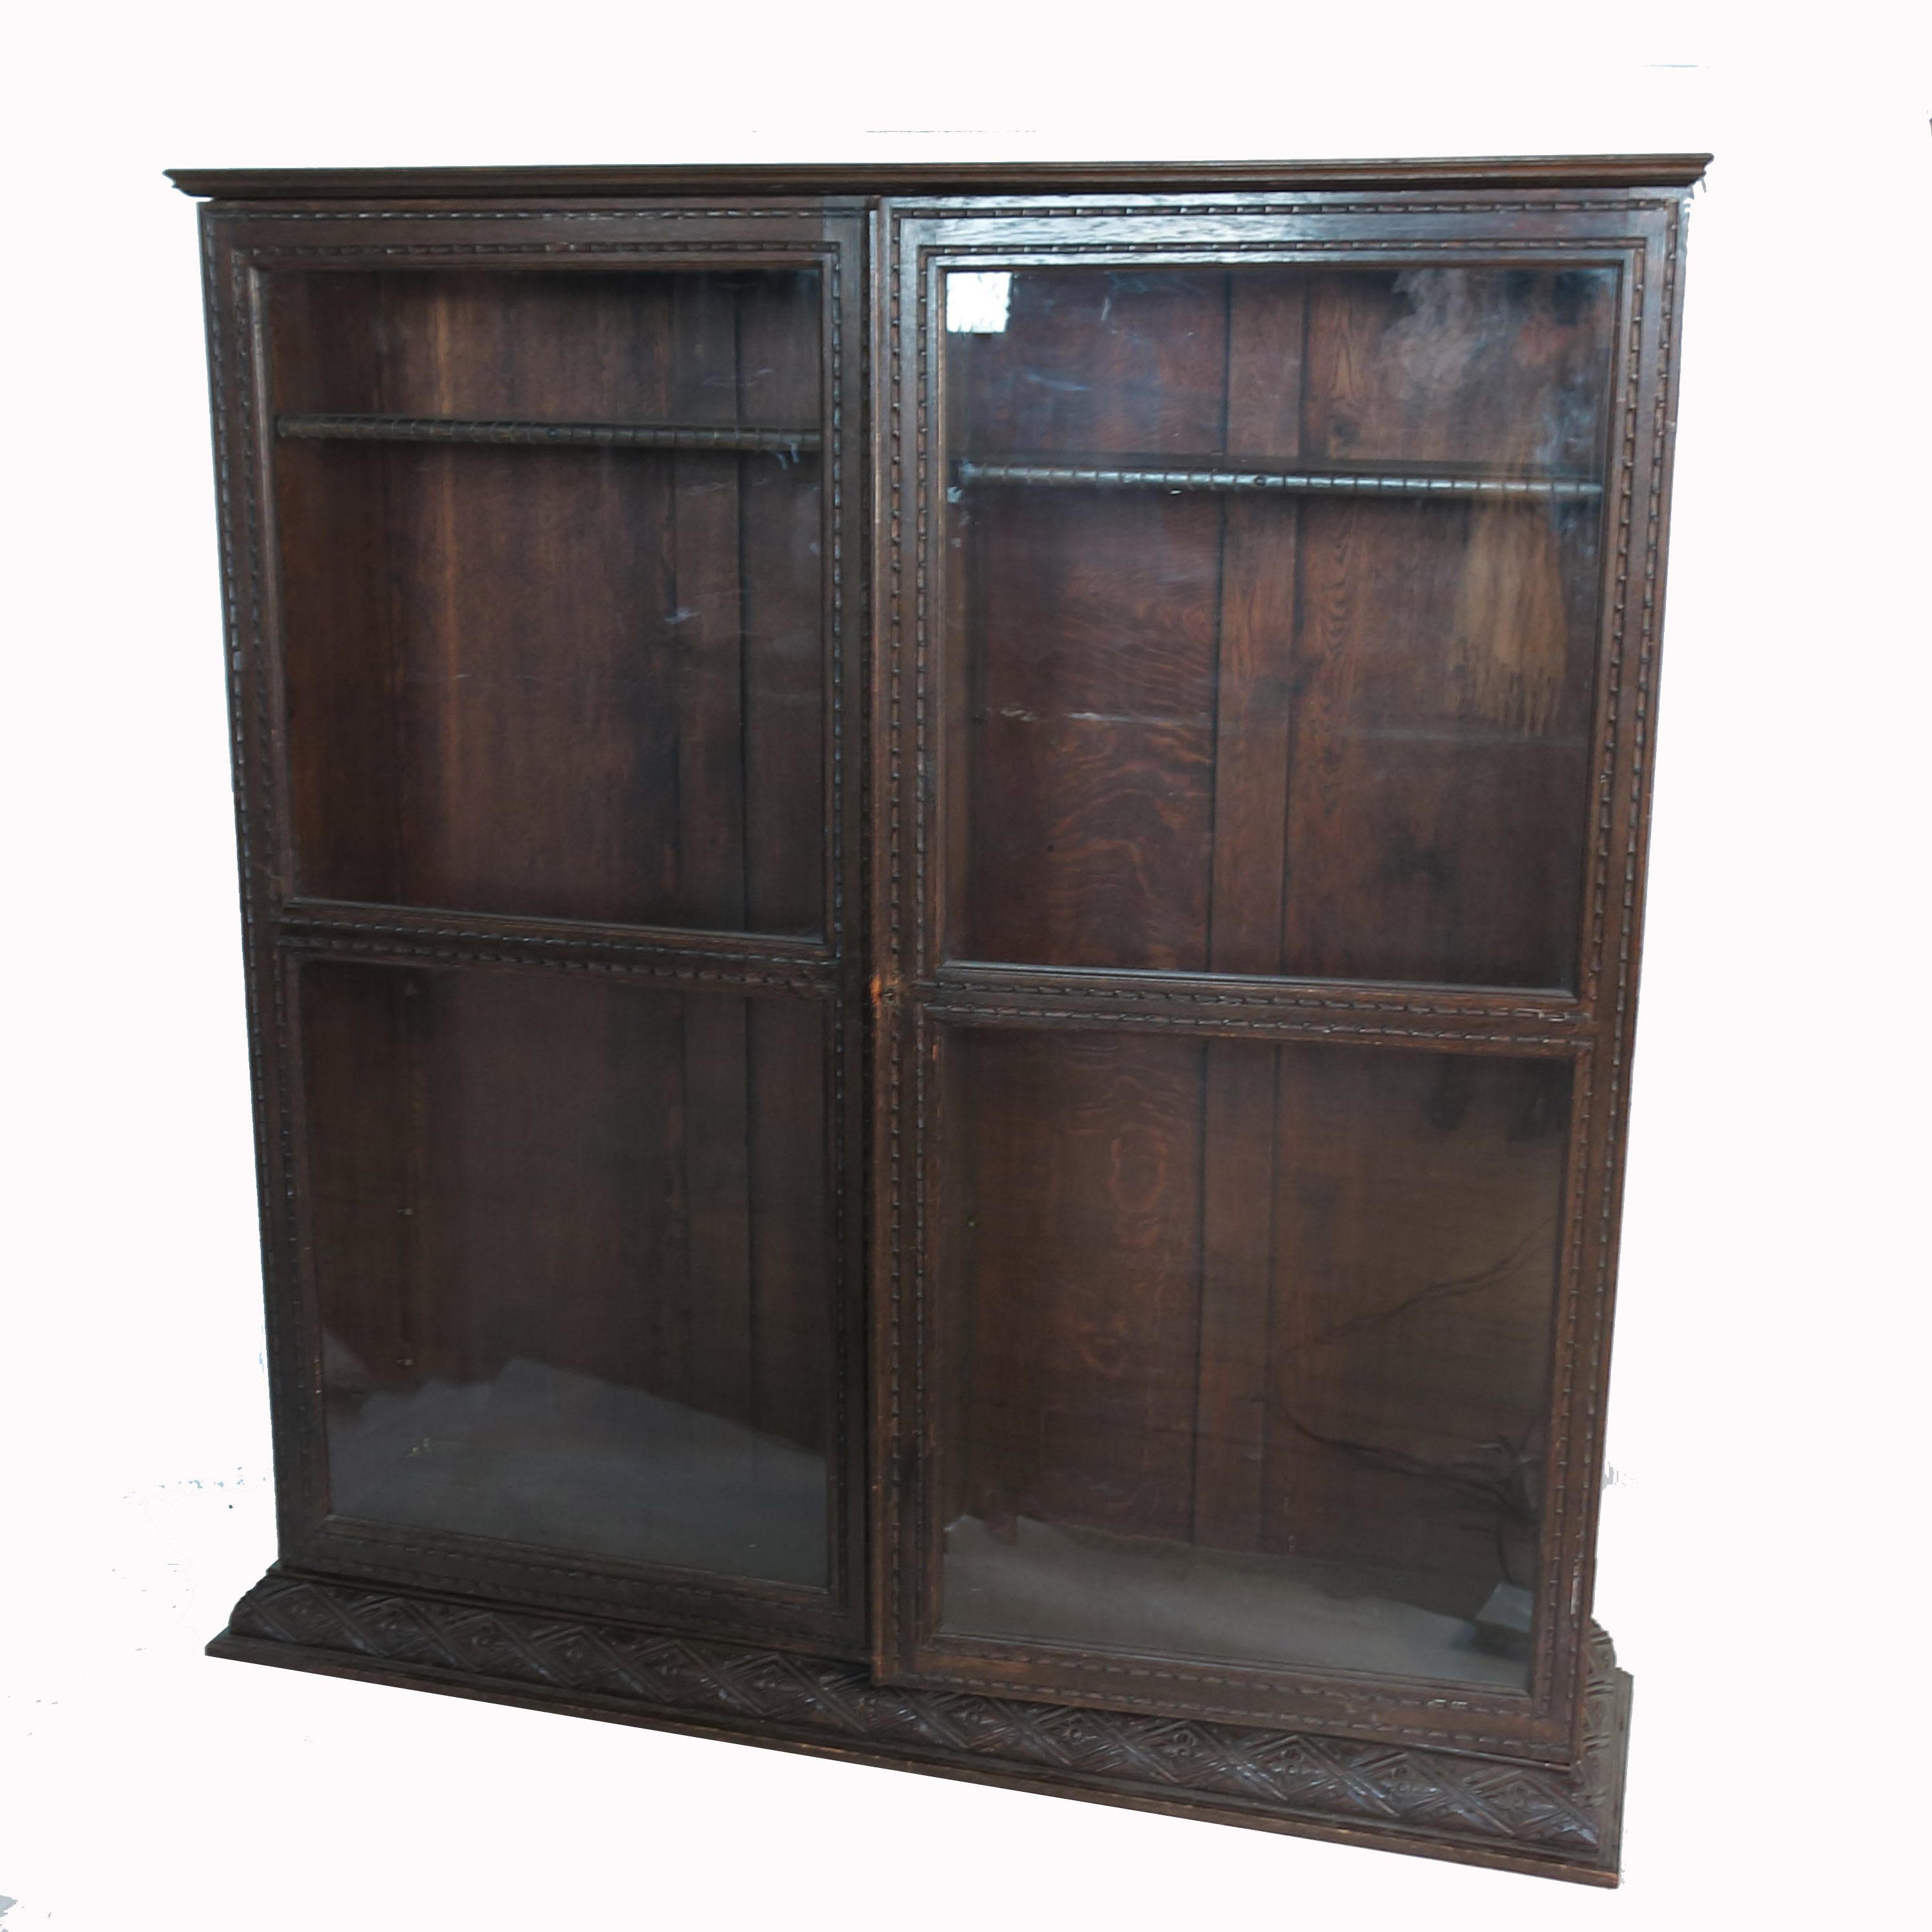 An oak two door glazed bookcase, with carved decoration and adjustable shelves, raised on a plinth